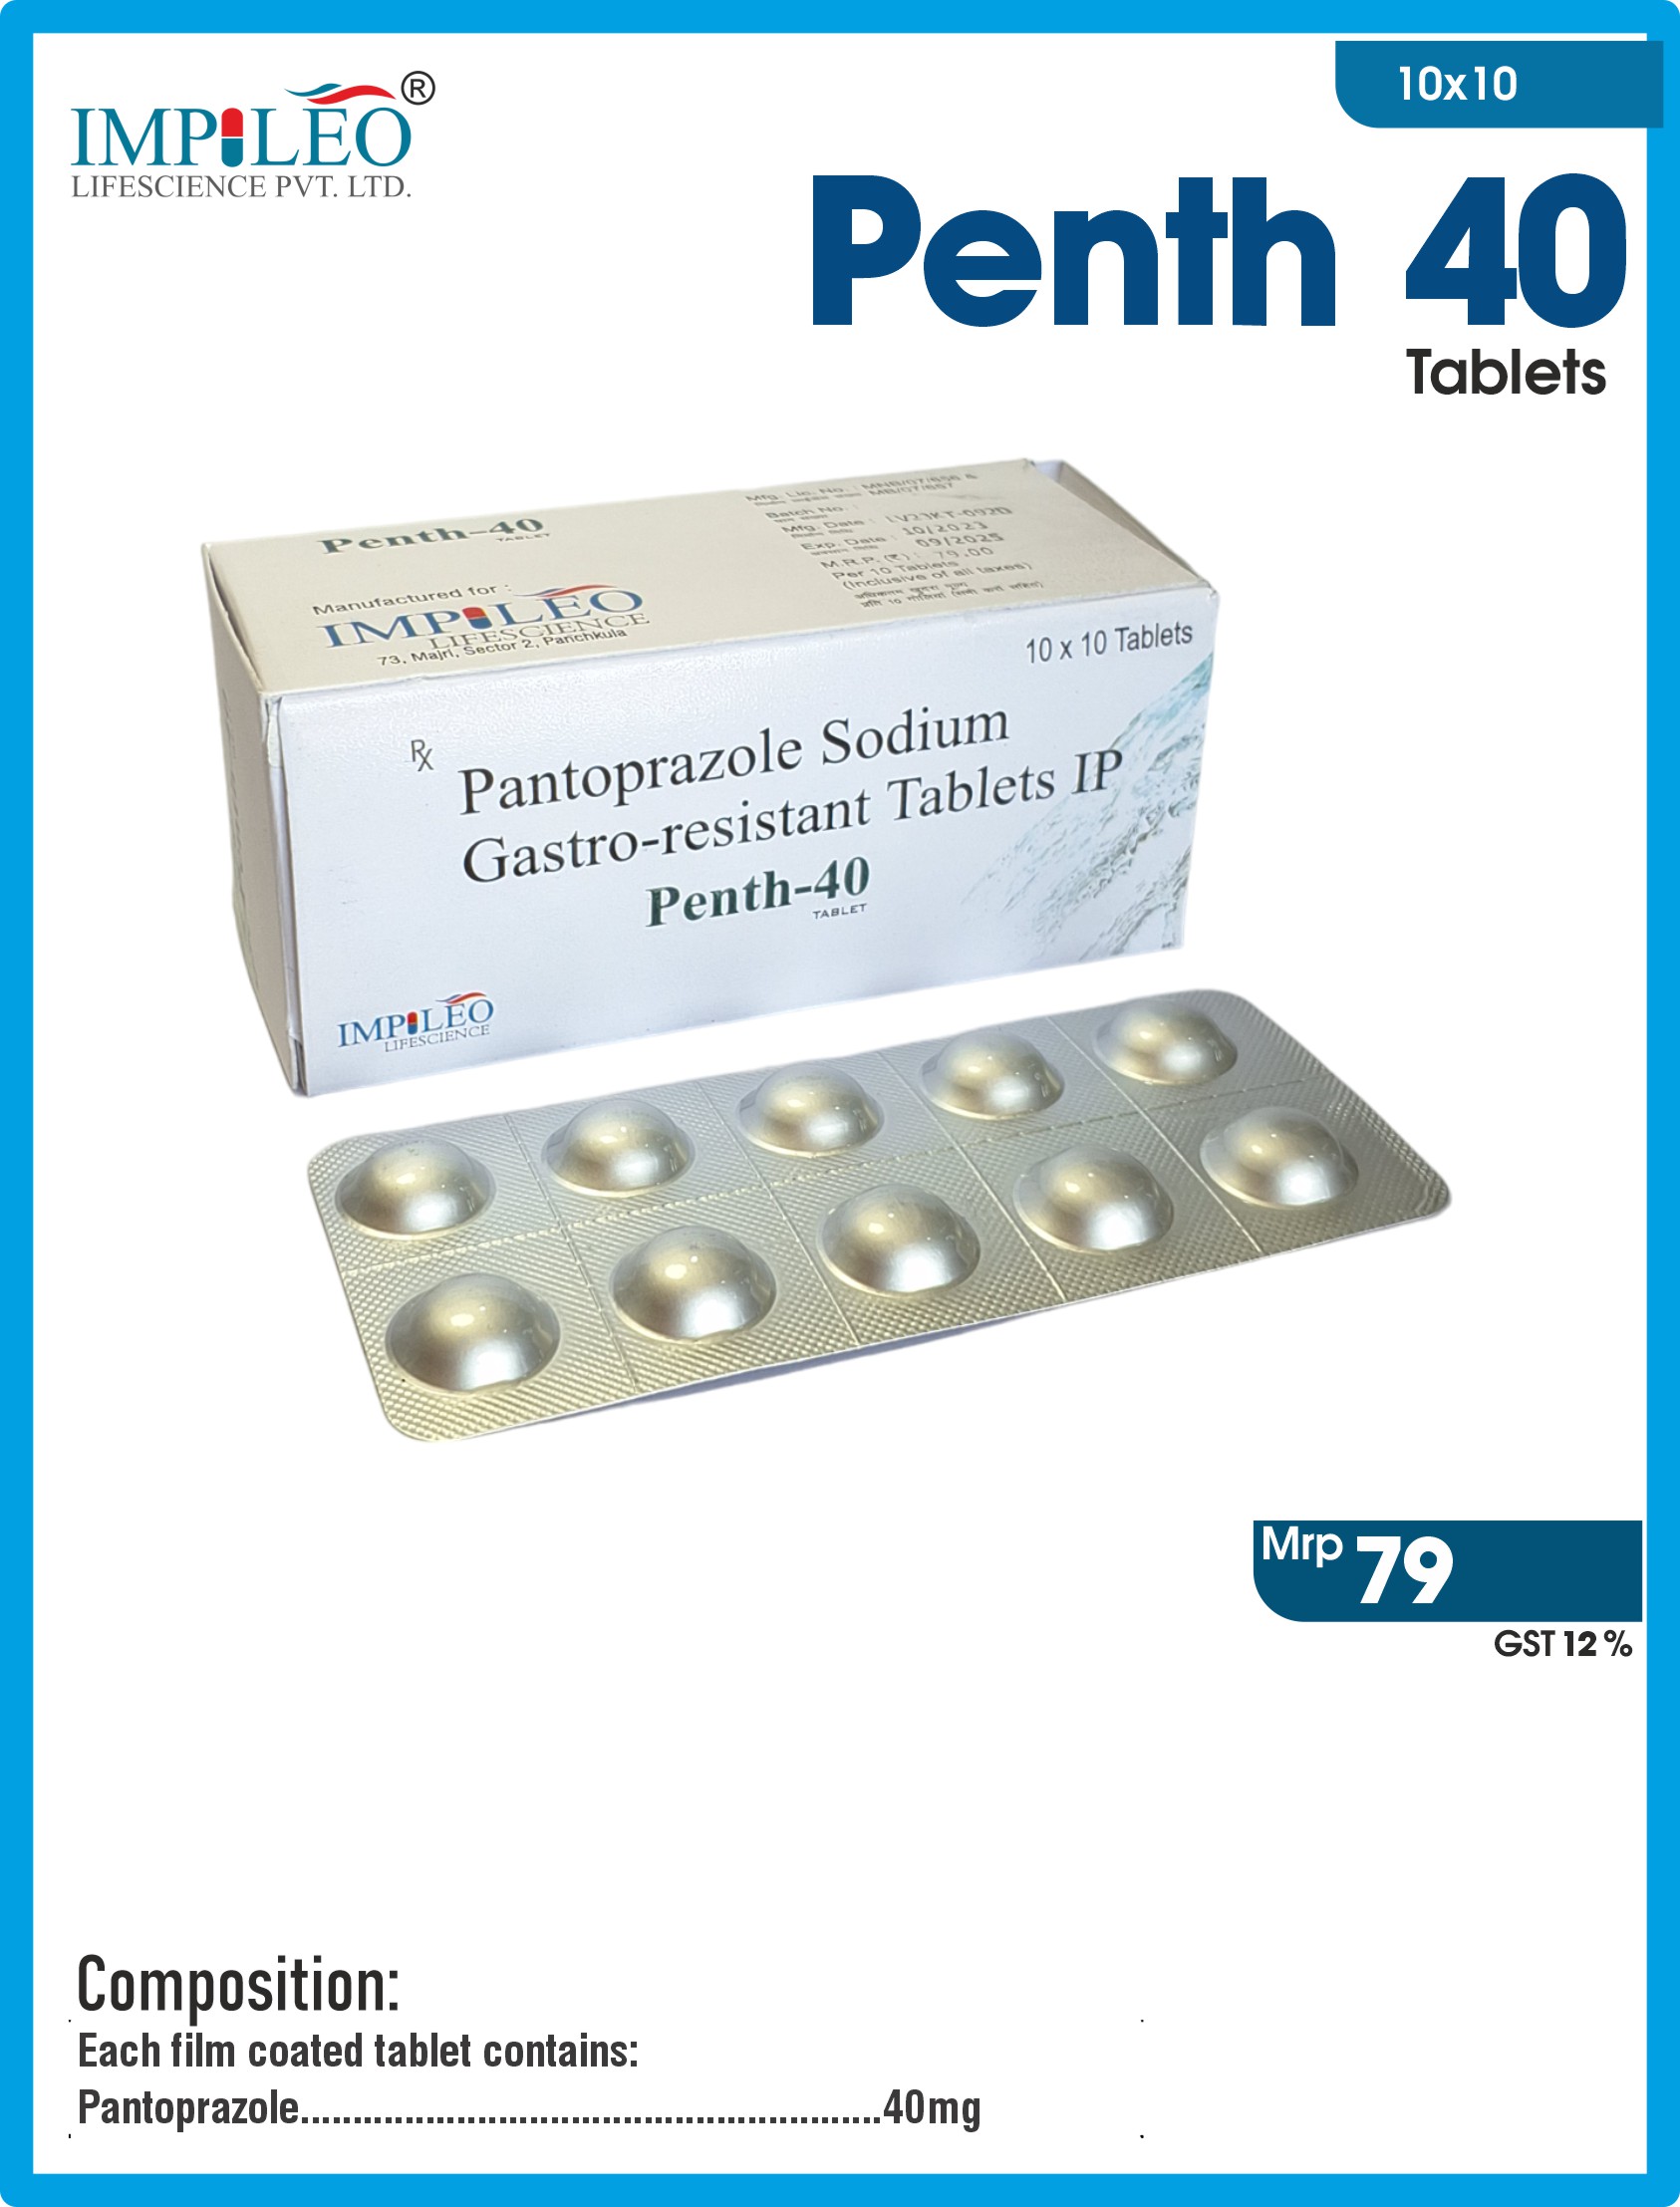 Premium Pantoprazole PENTH 40 Tablet : Partnering with Leading Third Party Manufacturing in Baddi